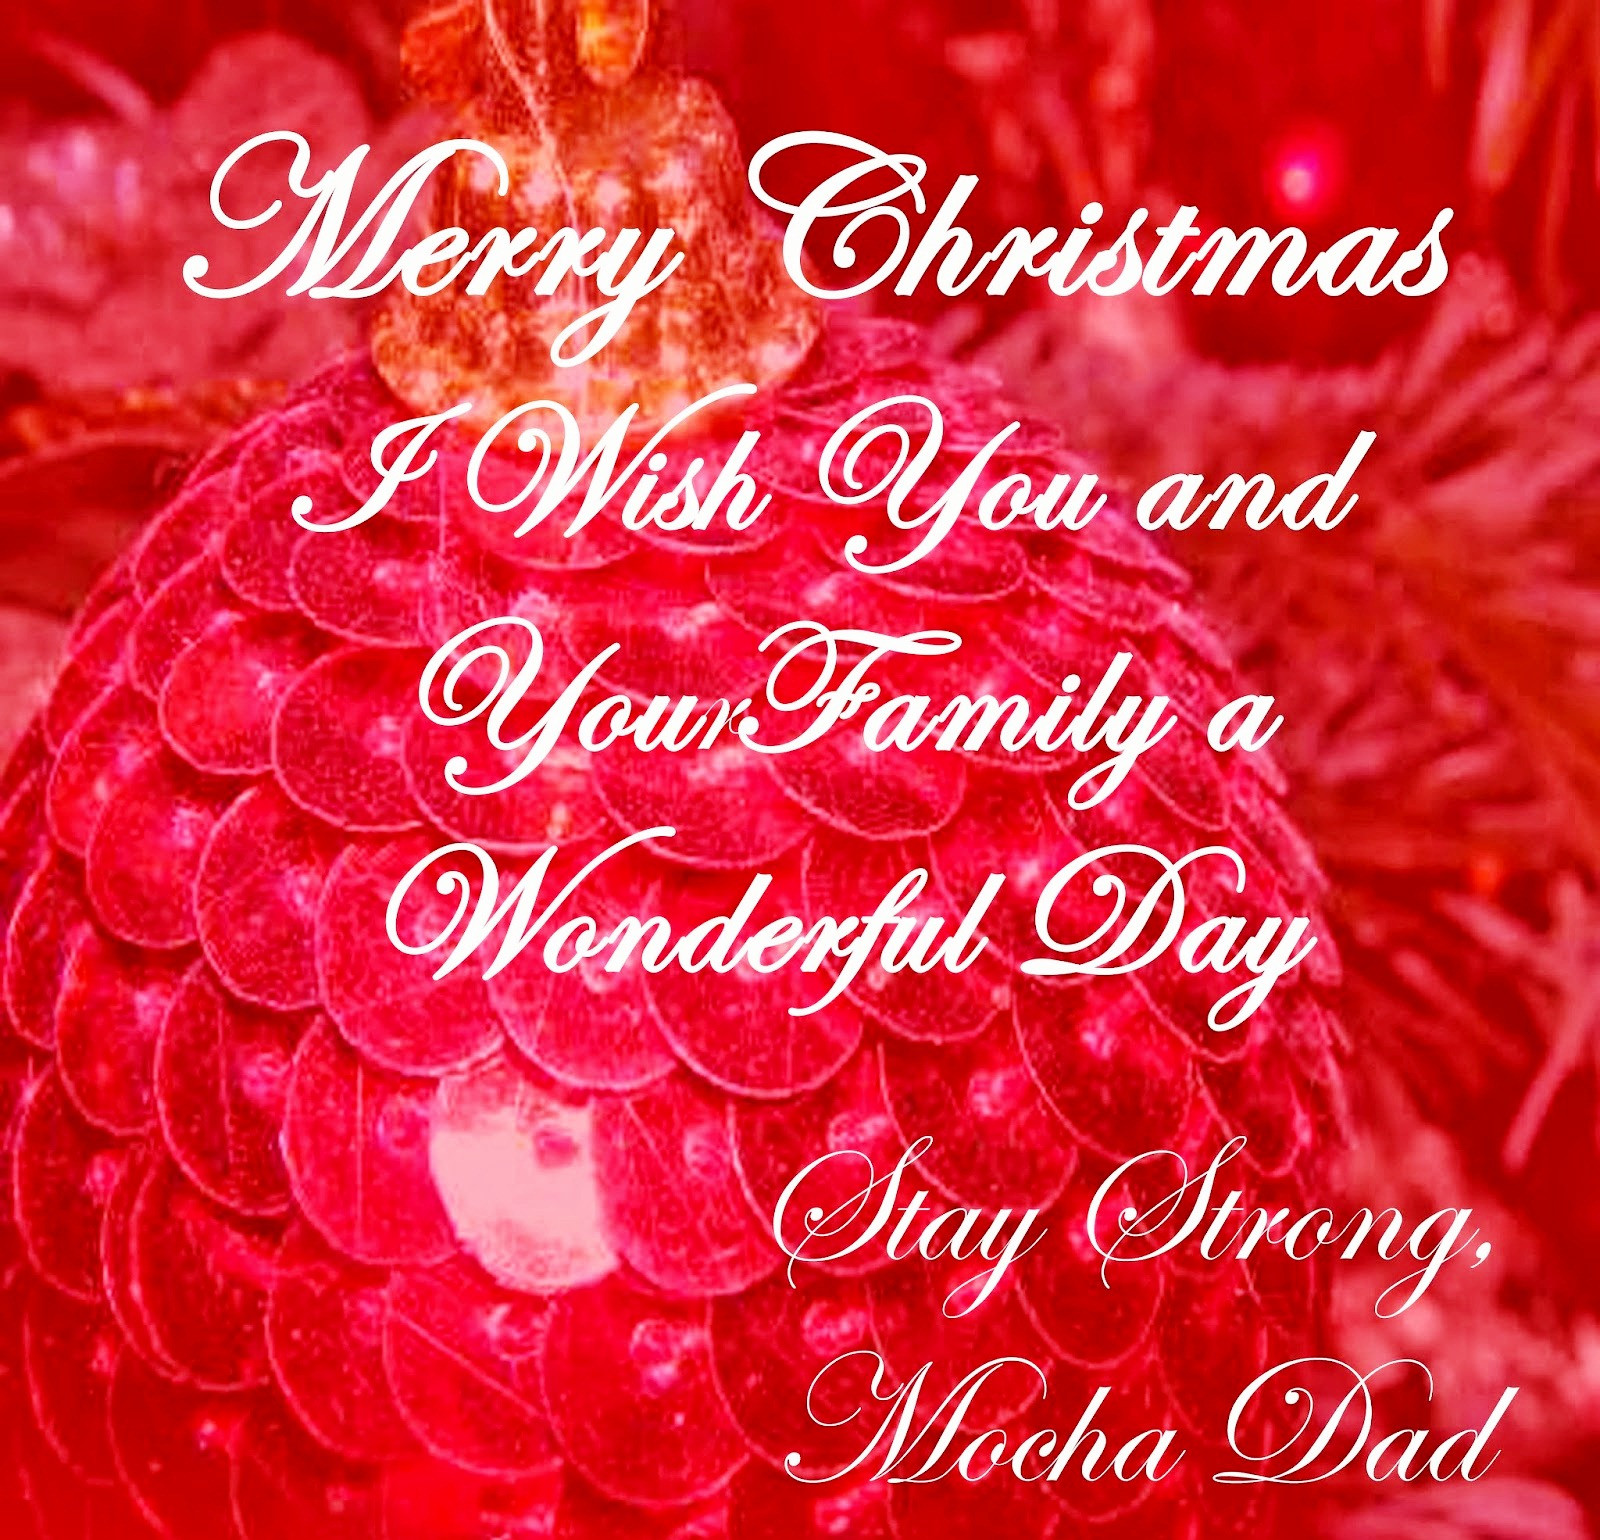 Merry Christmas Quotes Images
 20 Merry Christmas Quotes 2014